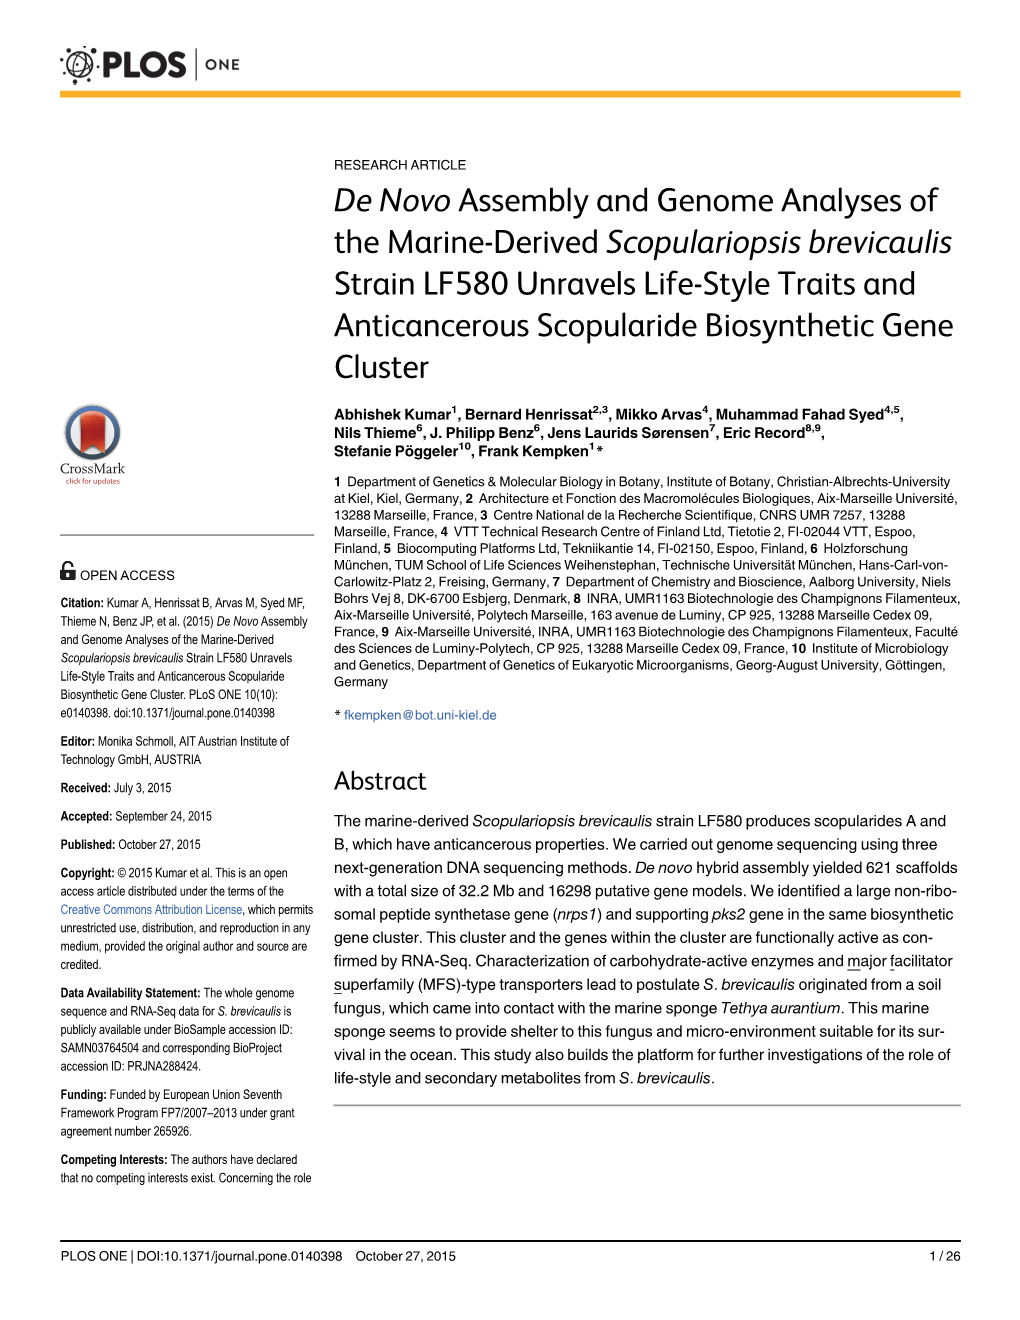 De Novo Assembly and Genome Analyses of The